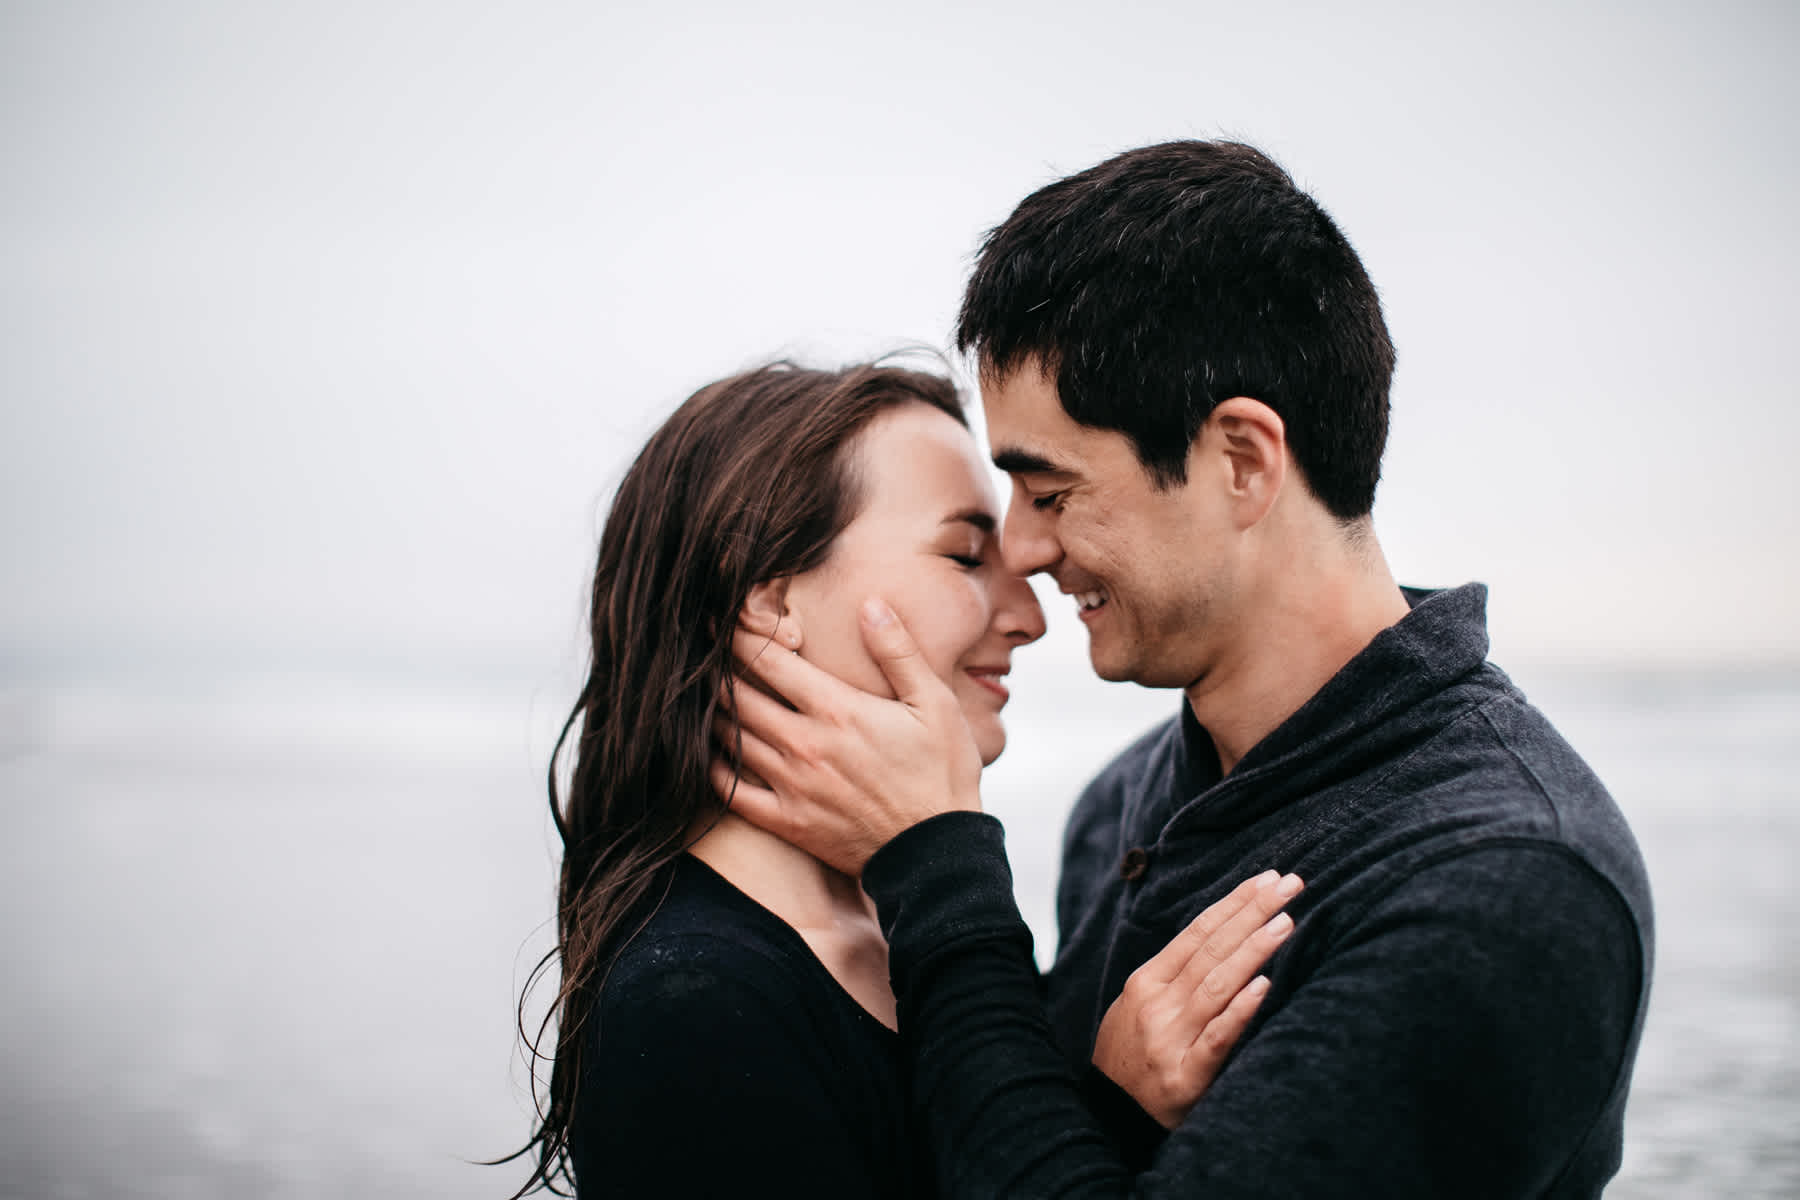 fort-funston-foggy-fun-beach-water-engagement-session-70